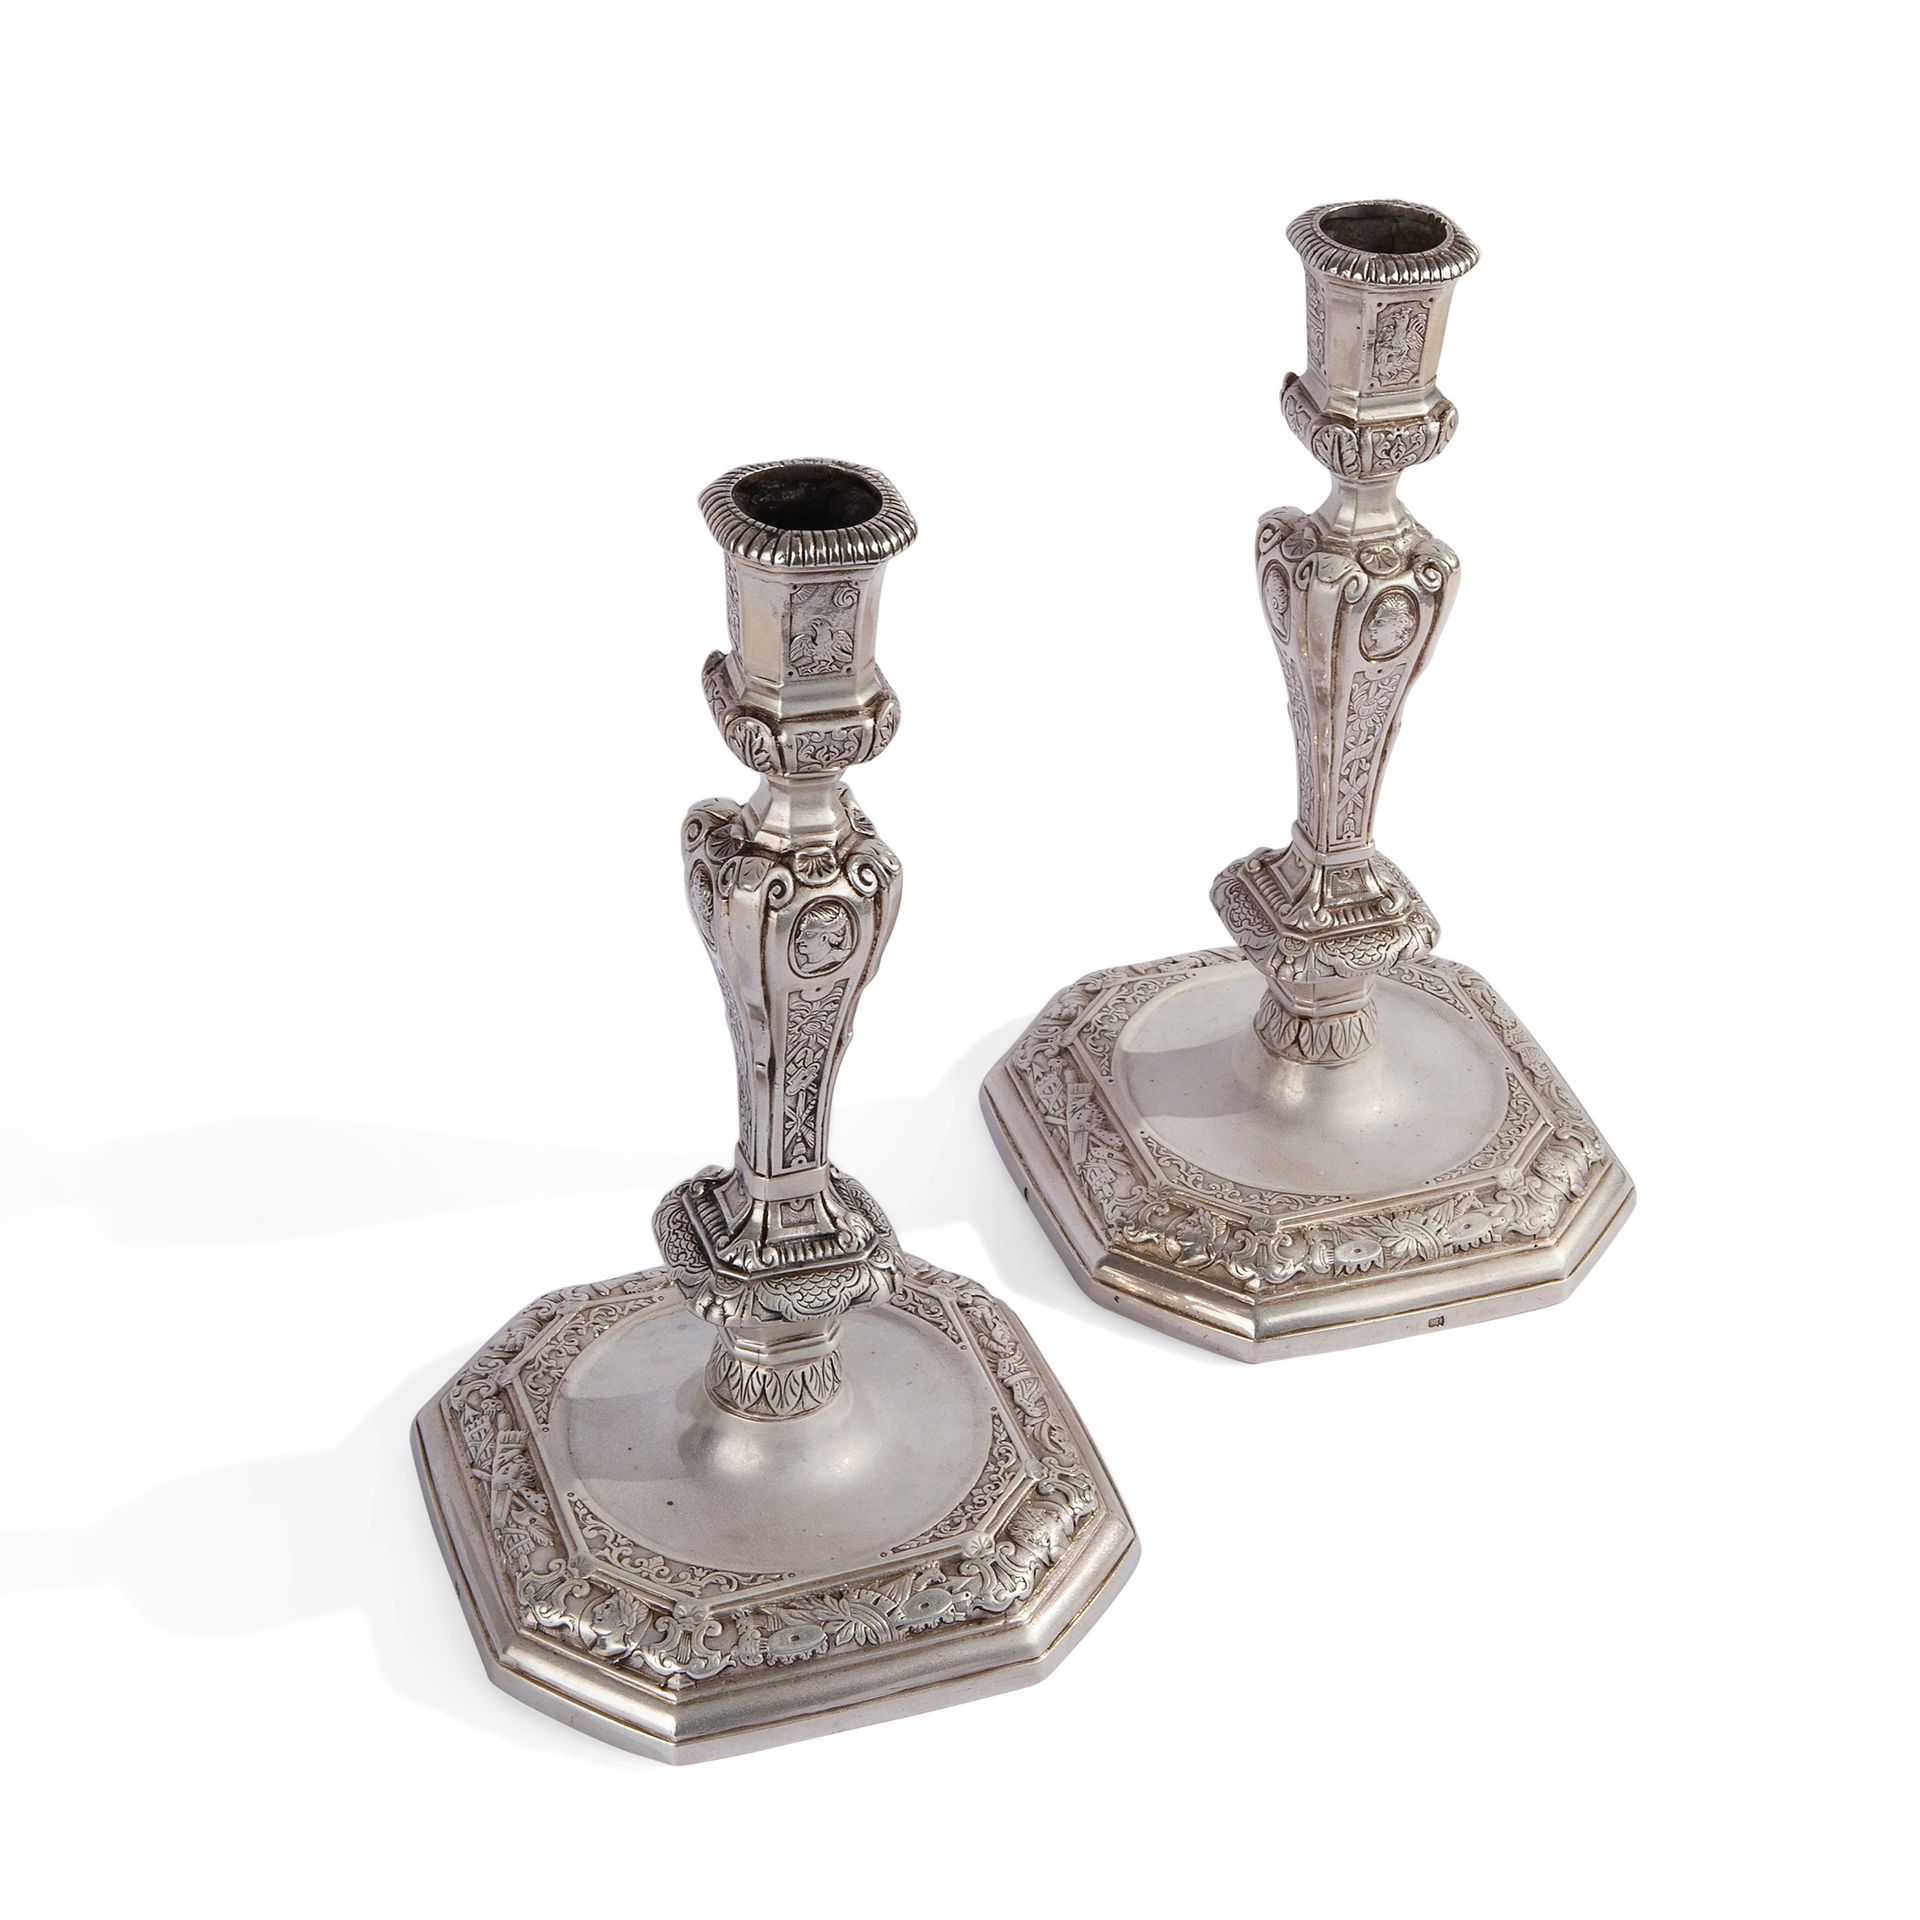 Pair of chased cast silver candlesticks, 18th century Llevan marcas de importaci&hellip;